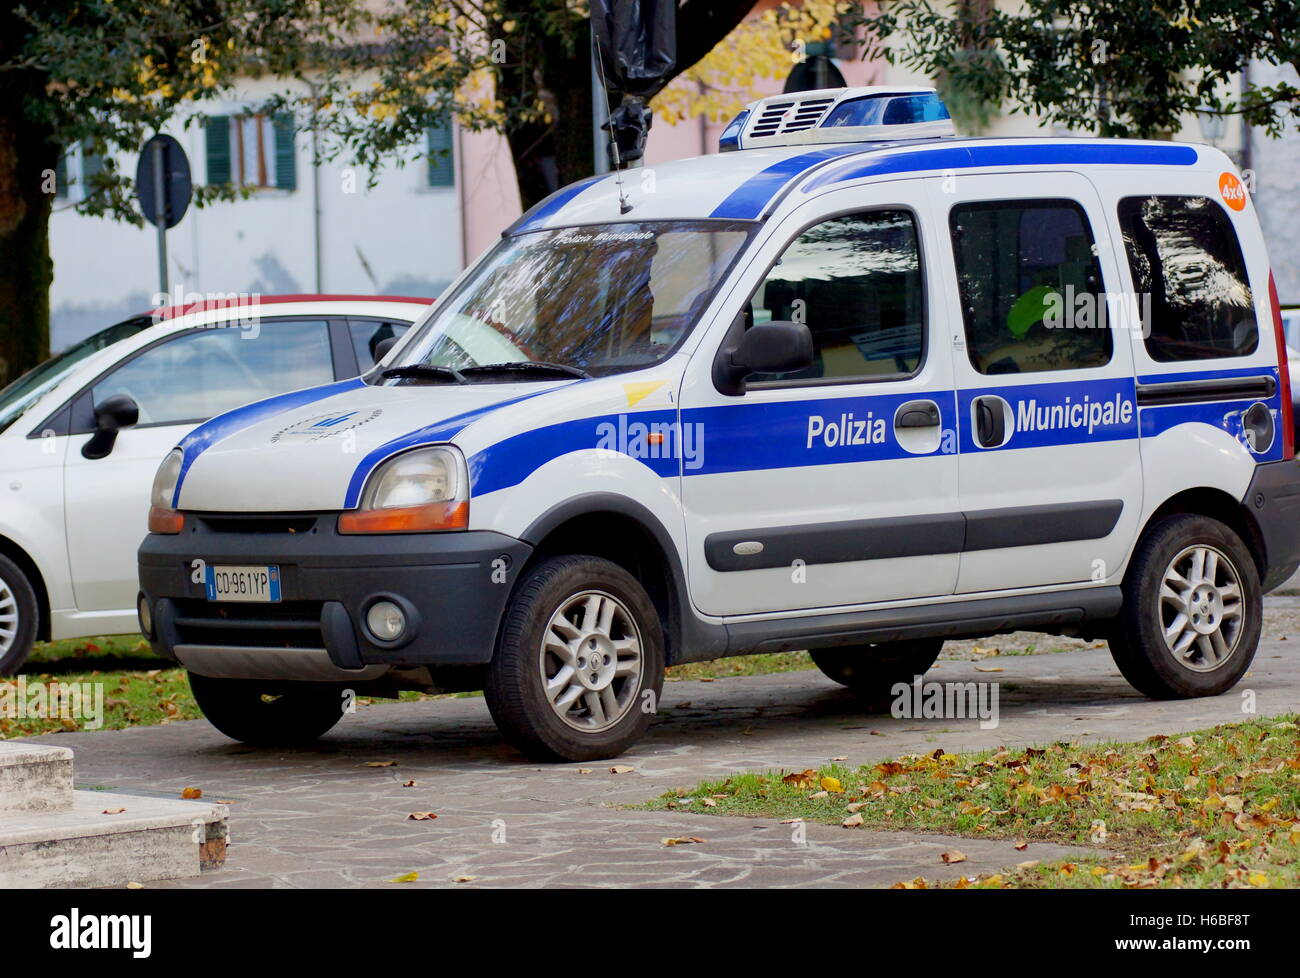 Police car parked on the street. Europe, Italy Stock Photo